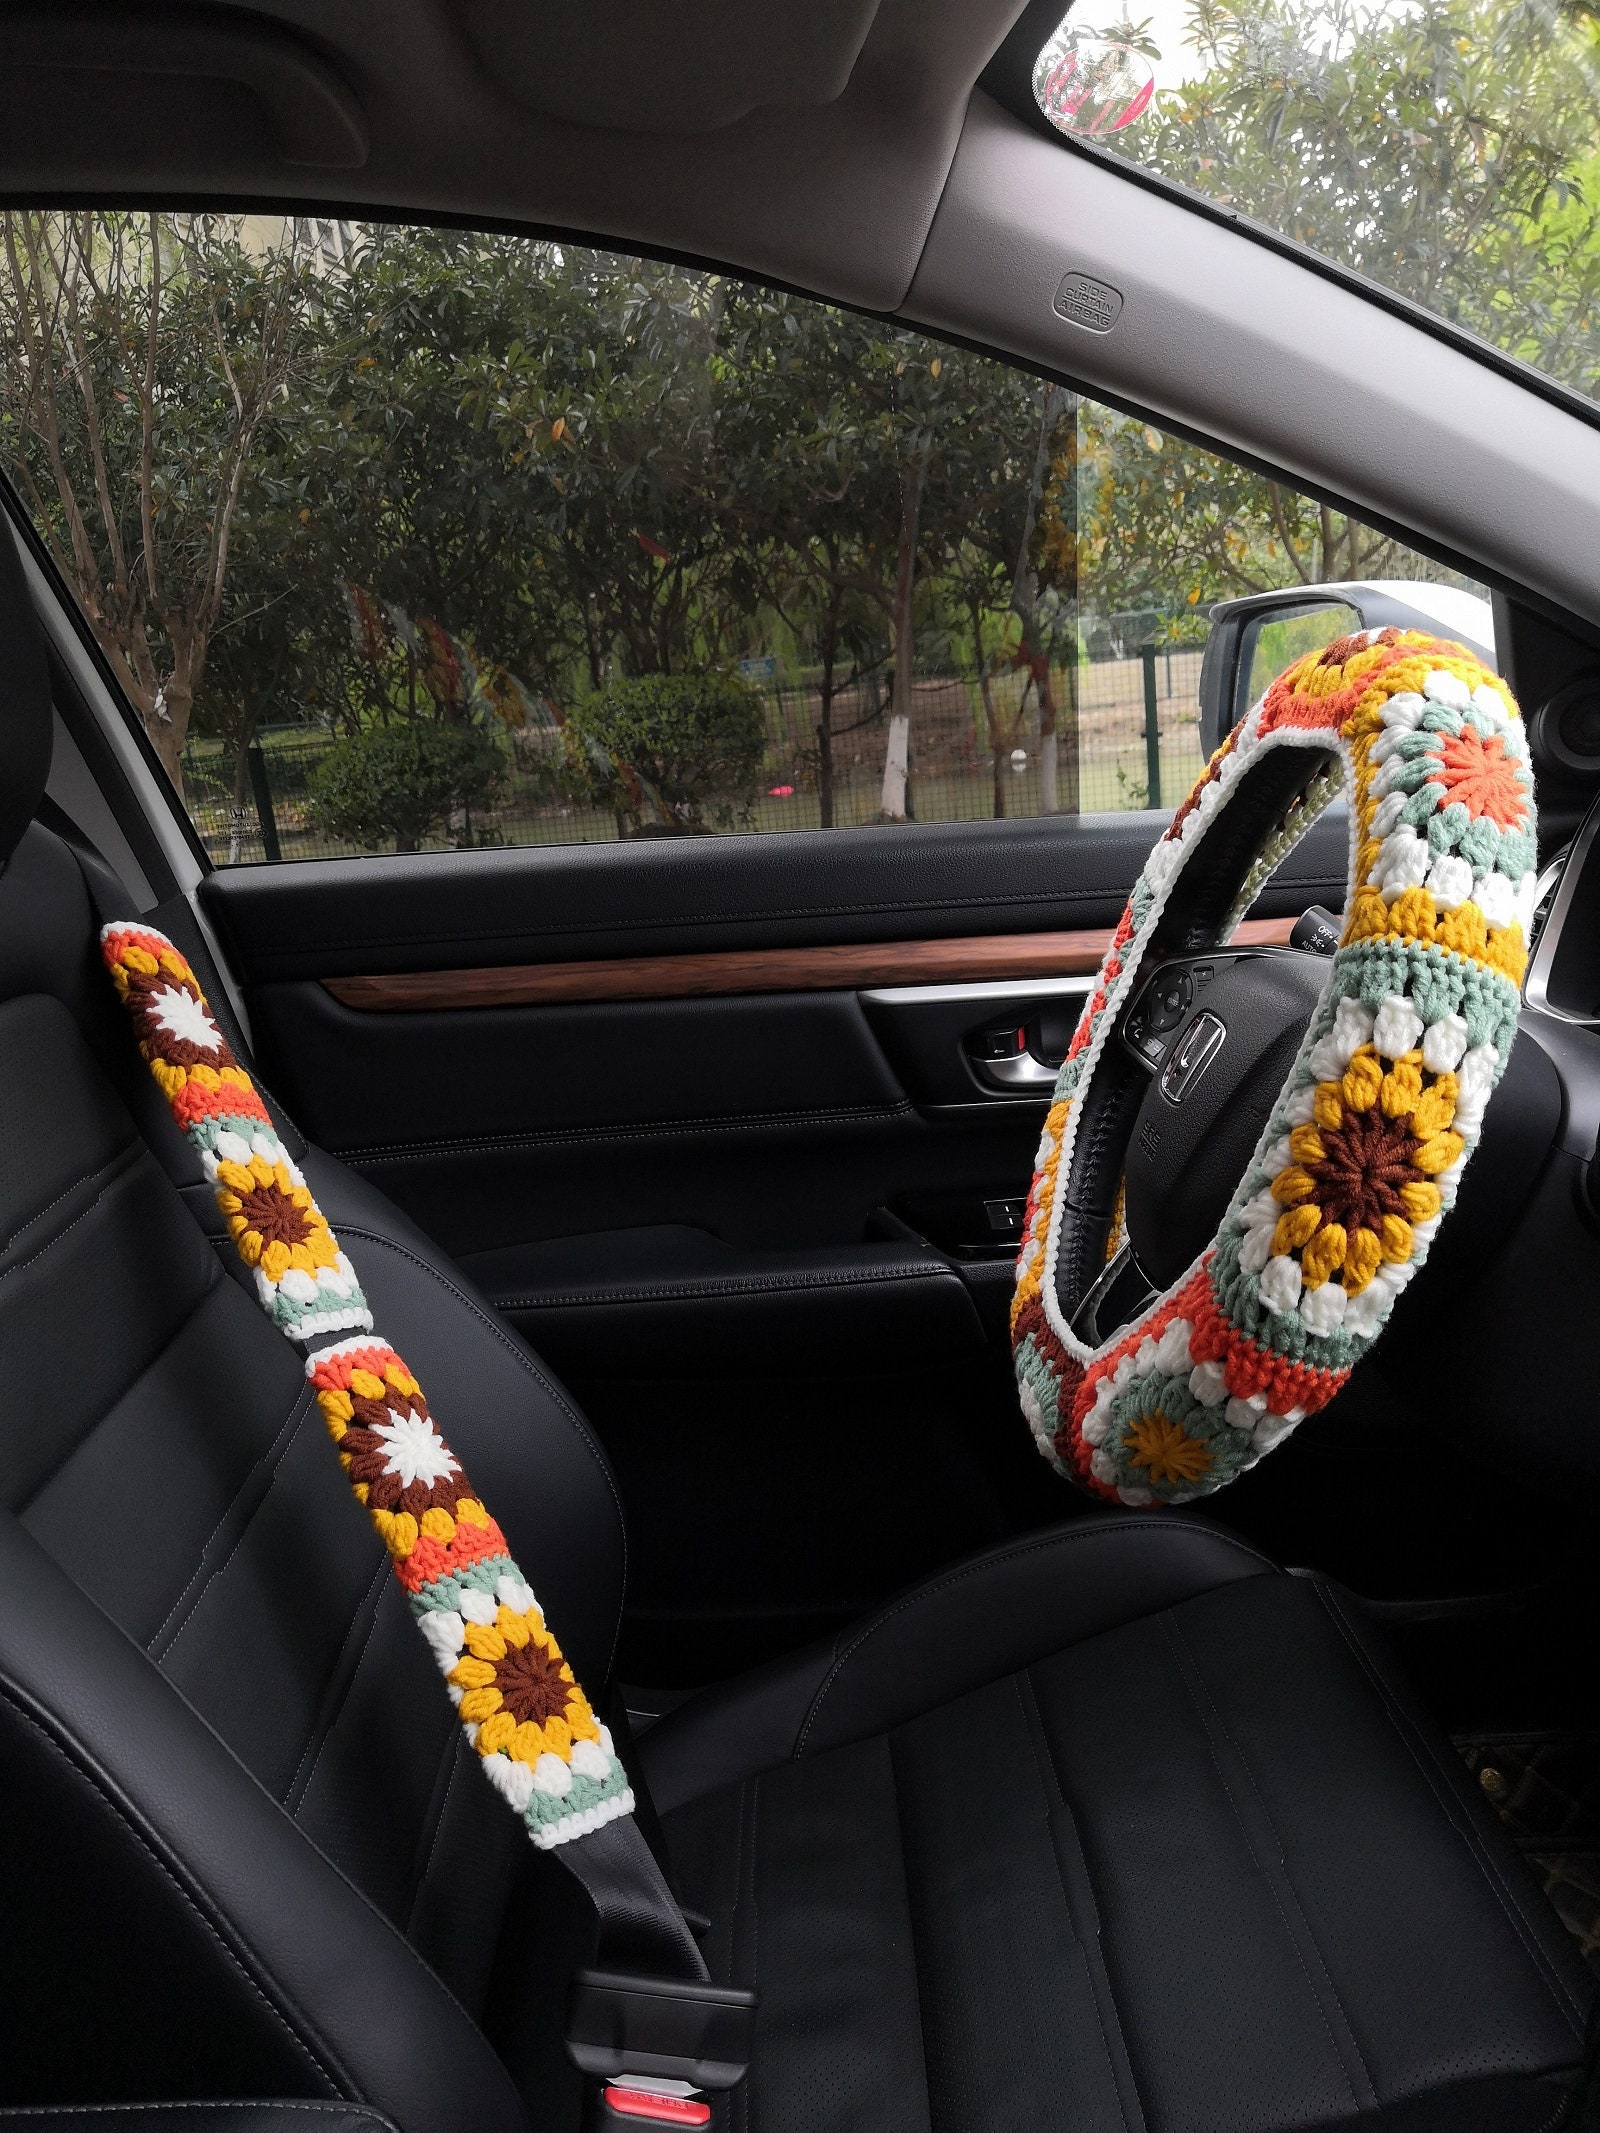 Buy Car Seat Cover,crochet Seat Covers,rainbow Granny Square Steering Wheel Cover  Seat Cover Headrest Covers Car Accessories,car Interior Design Online in  India 